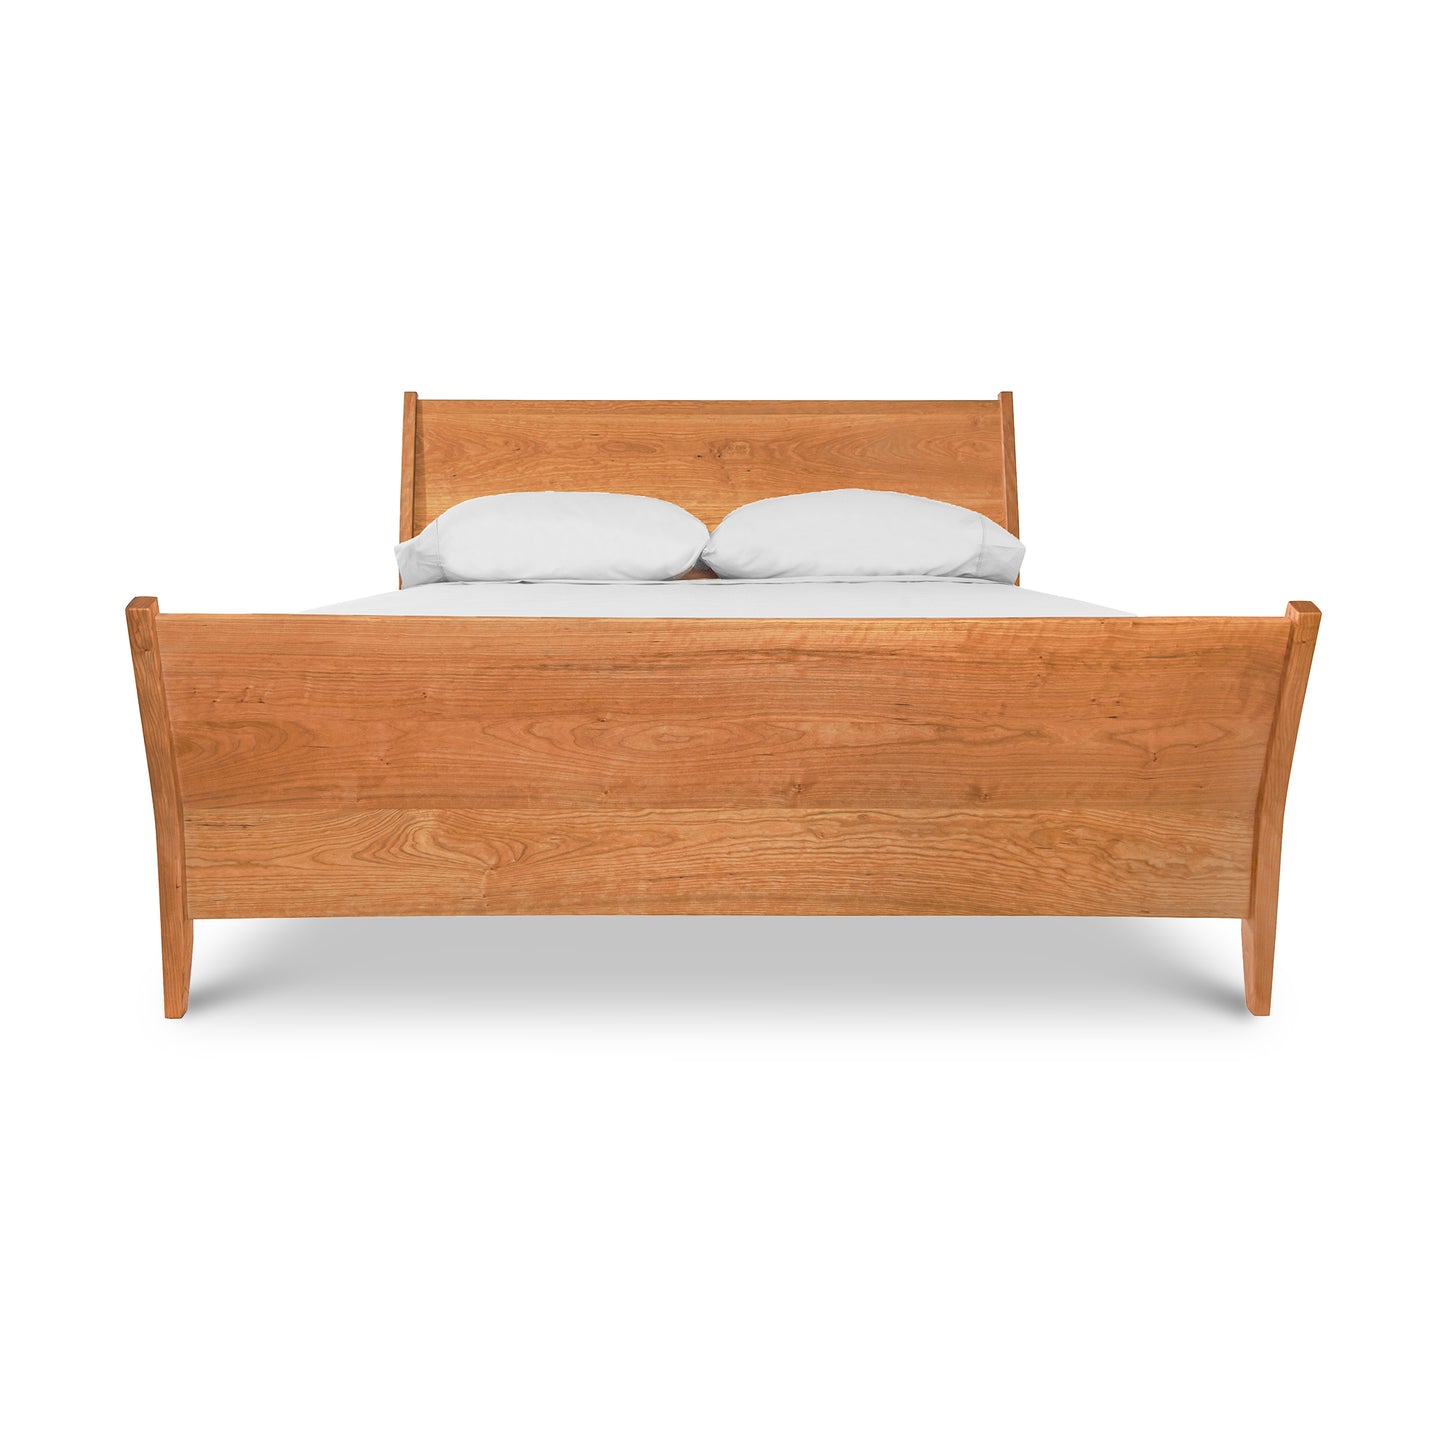 A Maple Corner Woodworks Andover Modern Incline Sleigh Bed with a high, slatted headboard and a contemporary sleigh footboard, featuring two white pillows. The bed is set against a white background.